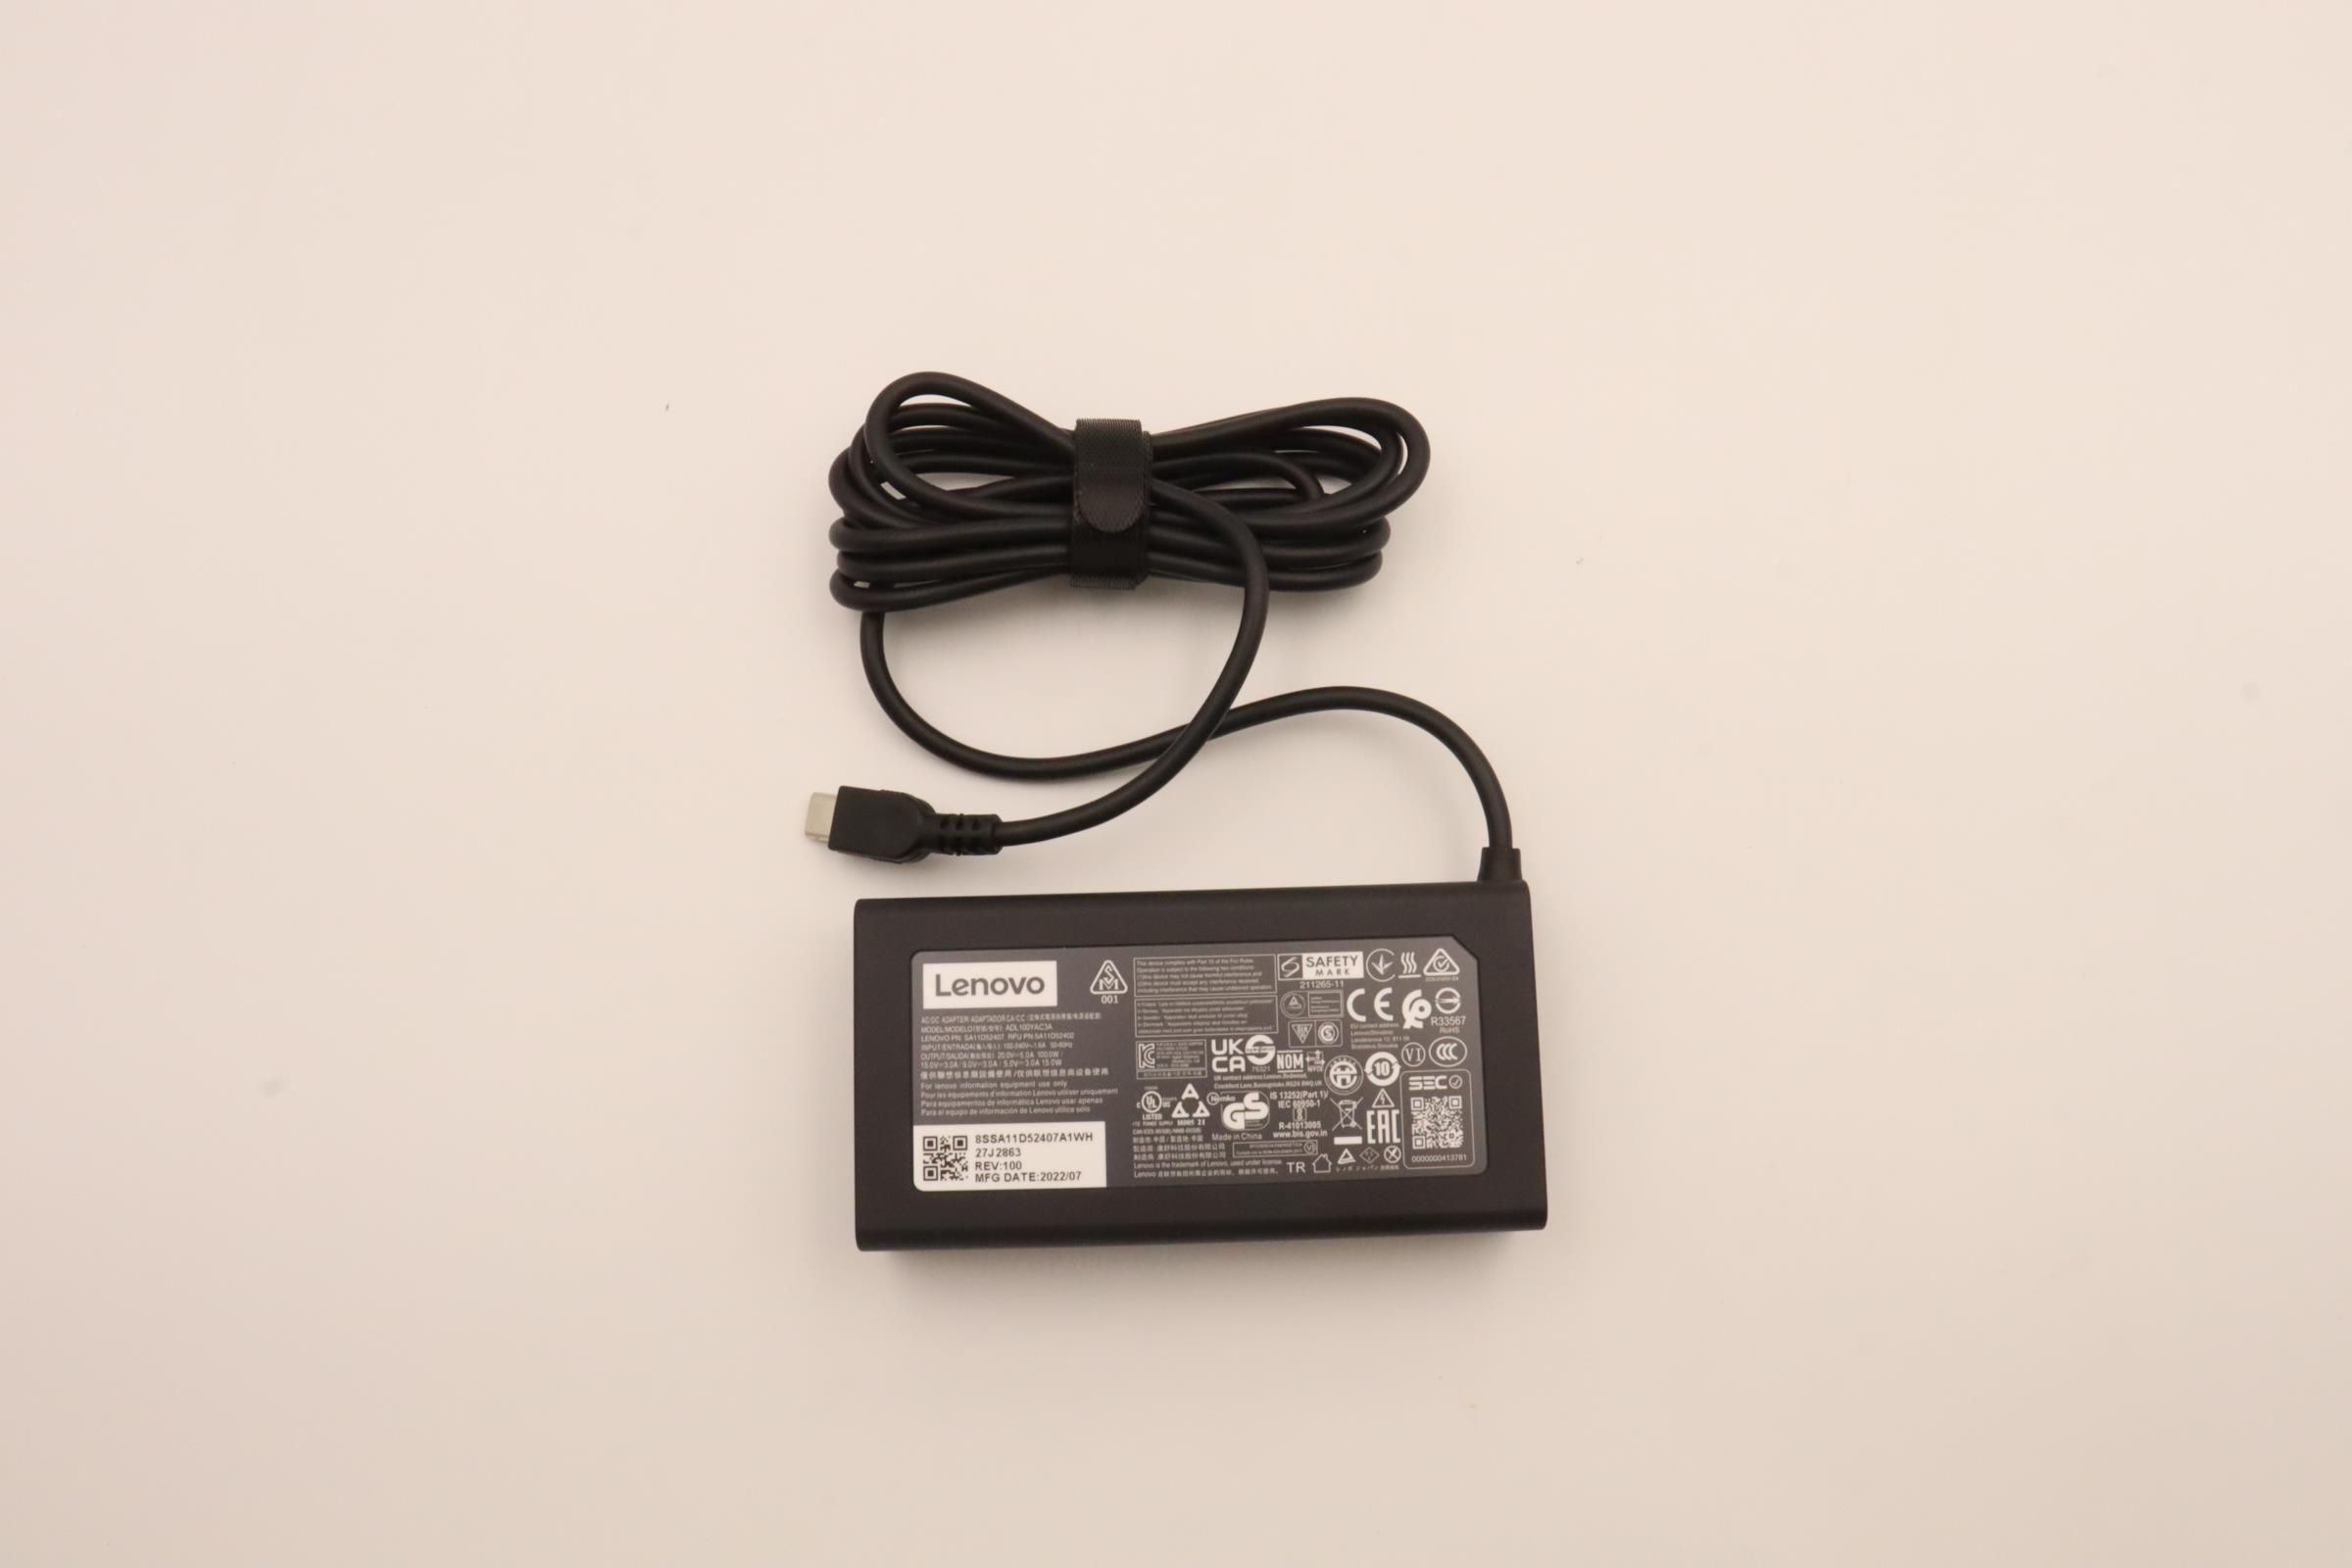 Lenovo ThinkPad T16 Gen 1 (21BV, 21BW) Laptop Charger (AC Adapter) - 5A11D52402